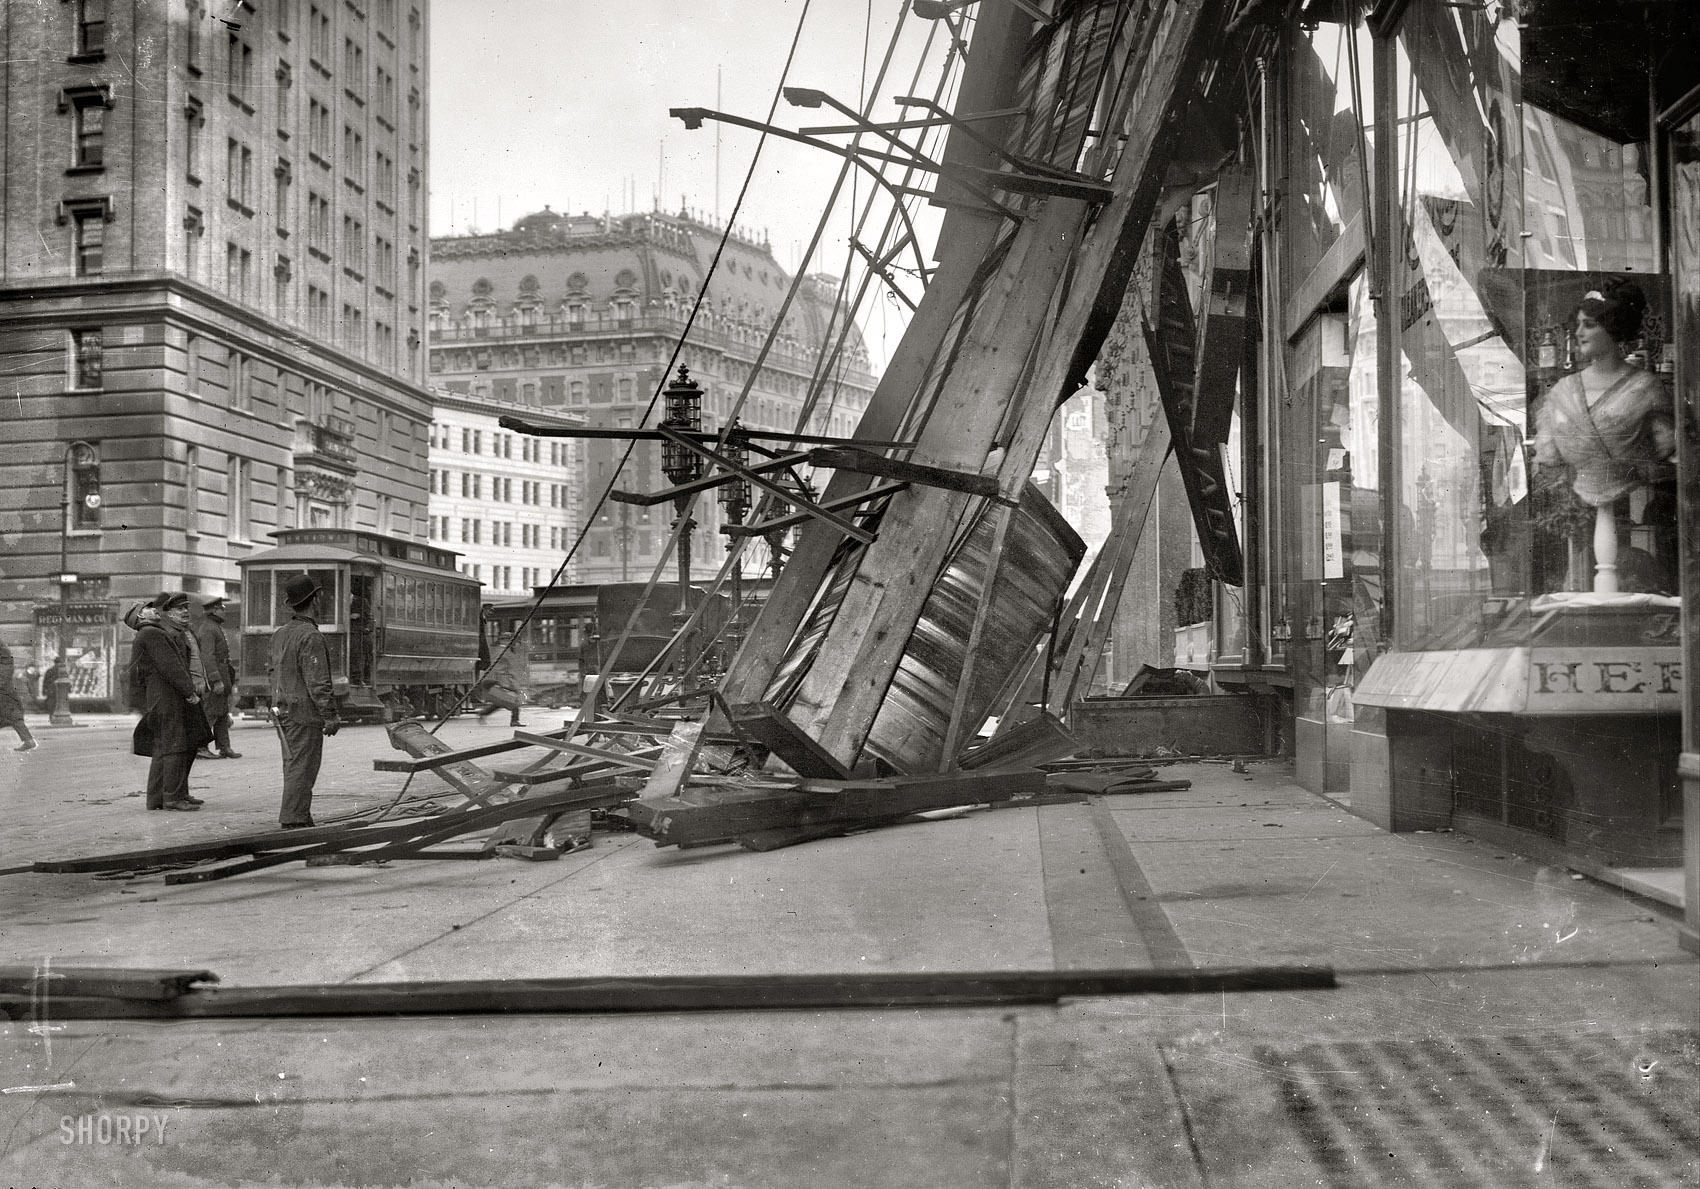 New York, February 23, 1912. "Three-ton electric sign blown into Broadway." 5x7 glass negative, George Grantham Bain Collection. View full size.